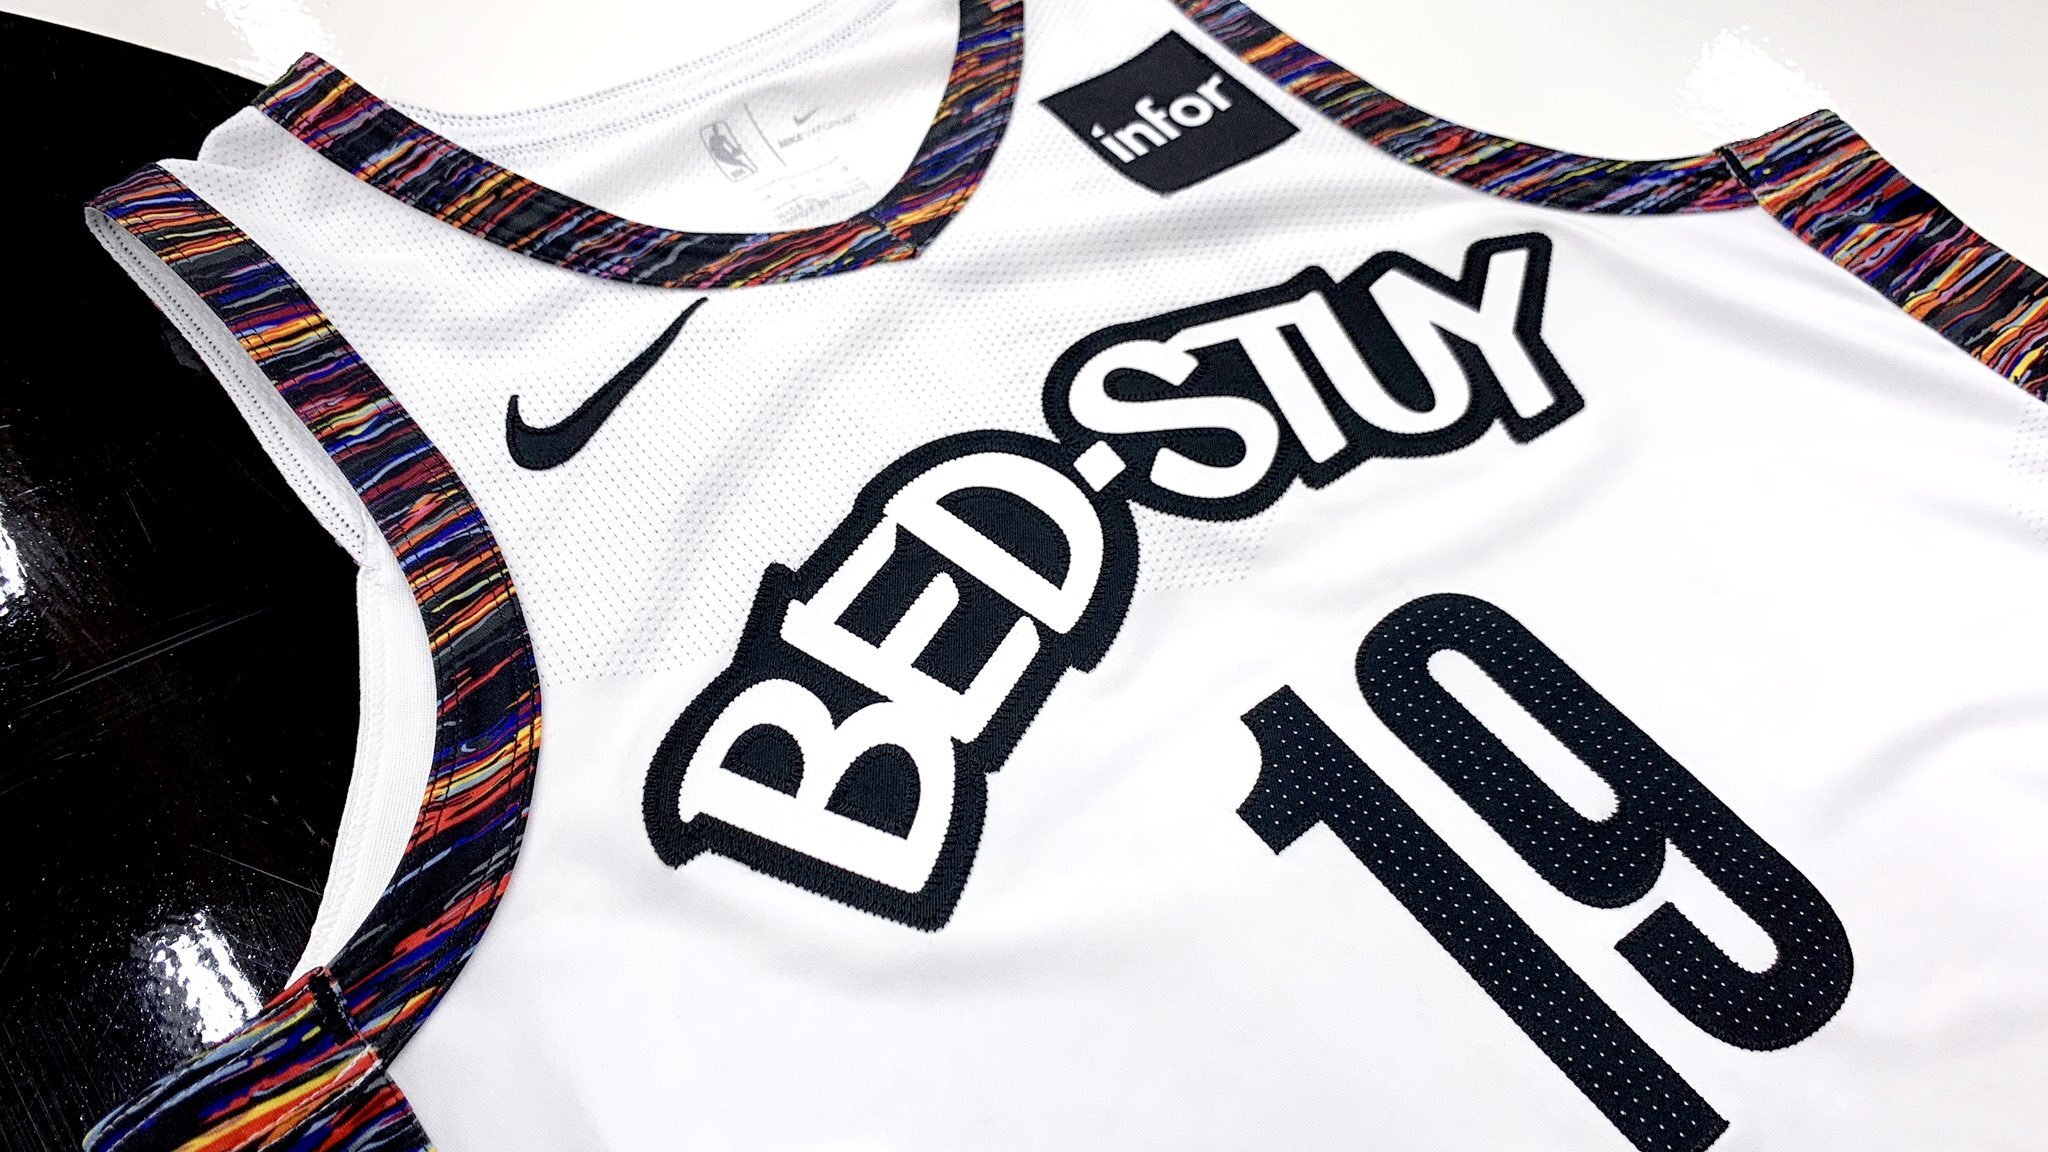 Brooklyn Nets] Introducing our 2023-24 City Edition uniform